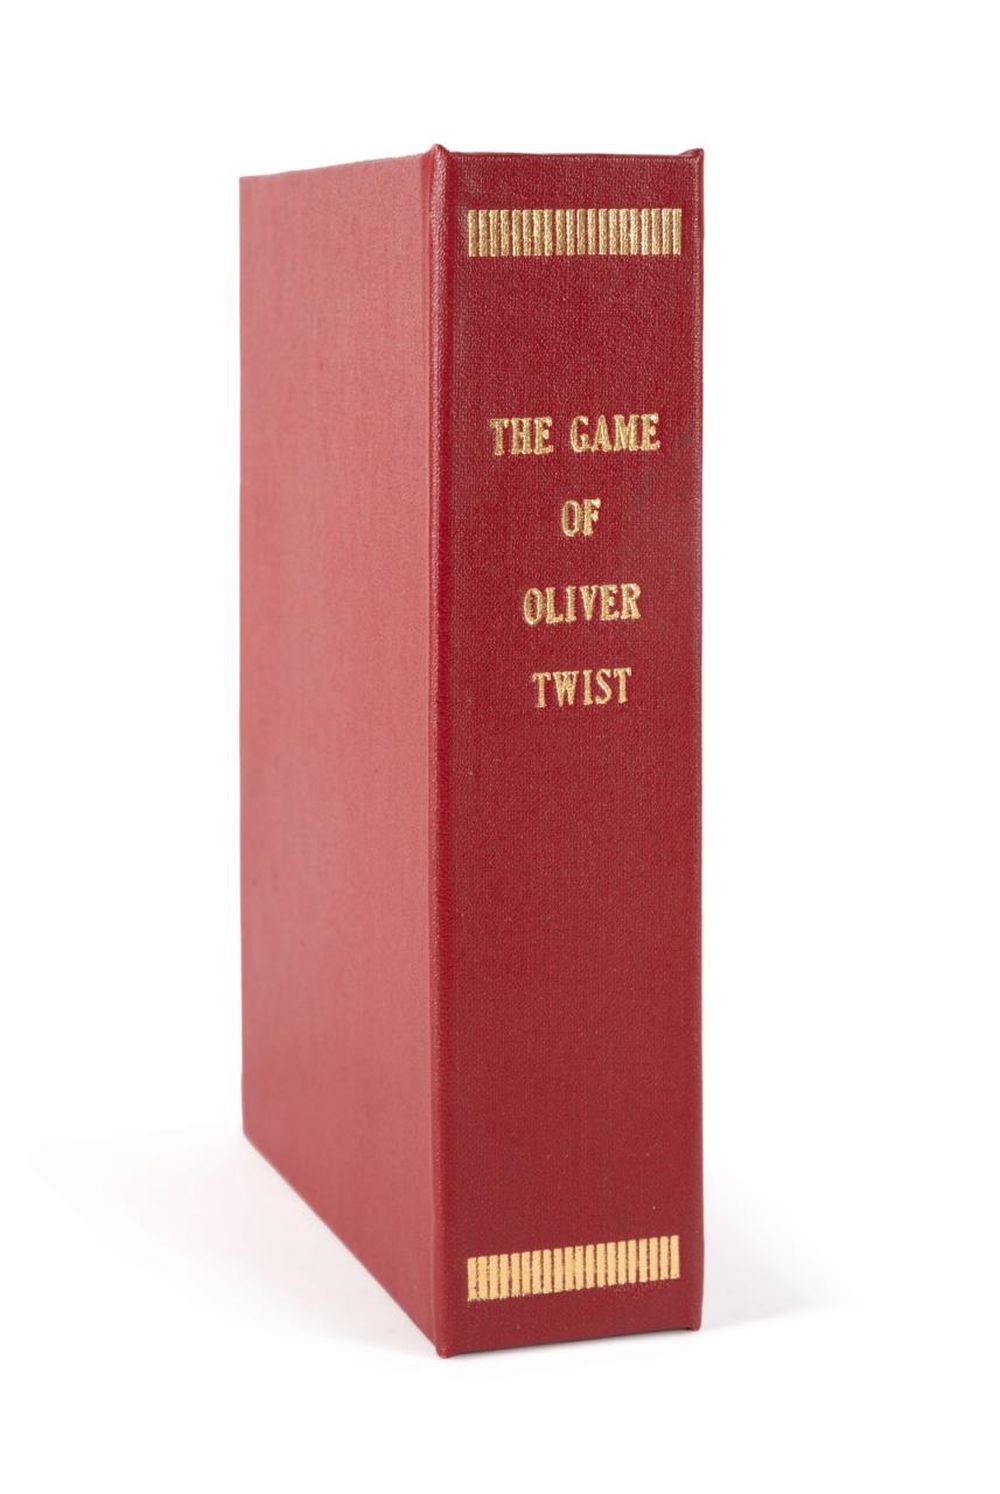 THE GAME OF OLIVER TWIST IN CUSTOM 3cd53f